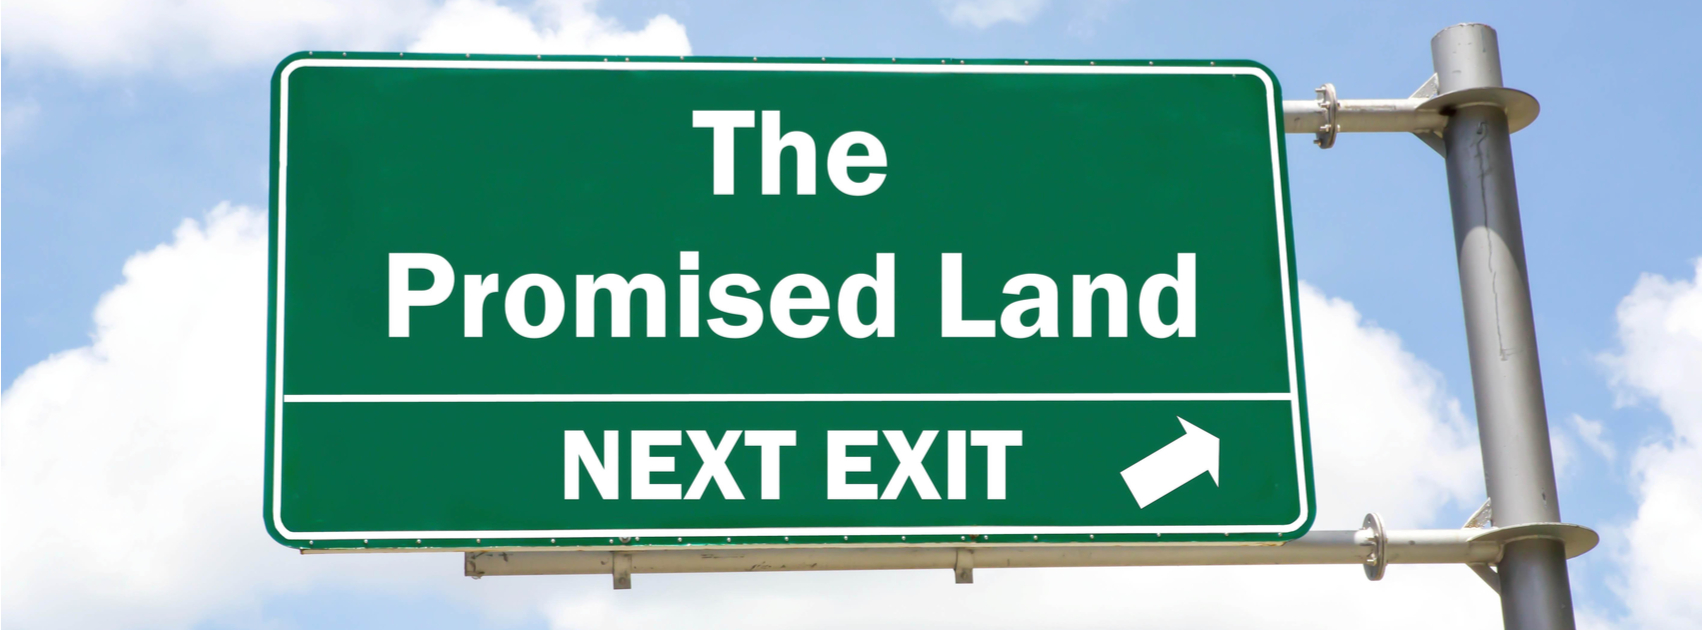 What Is the Promised Land?